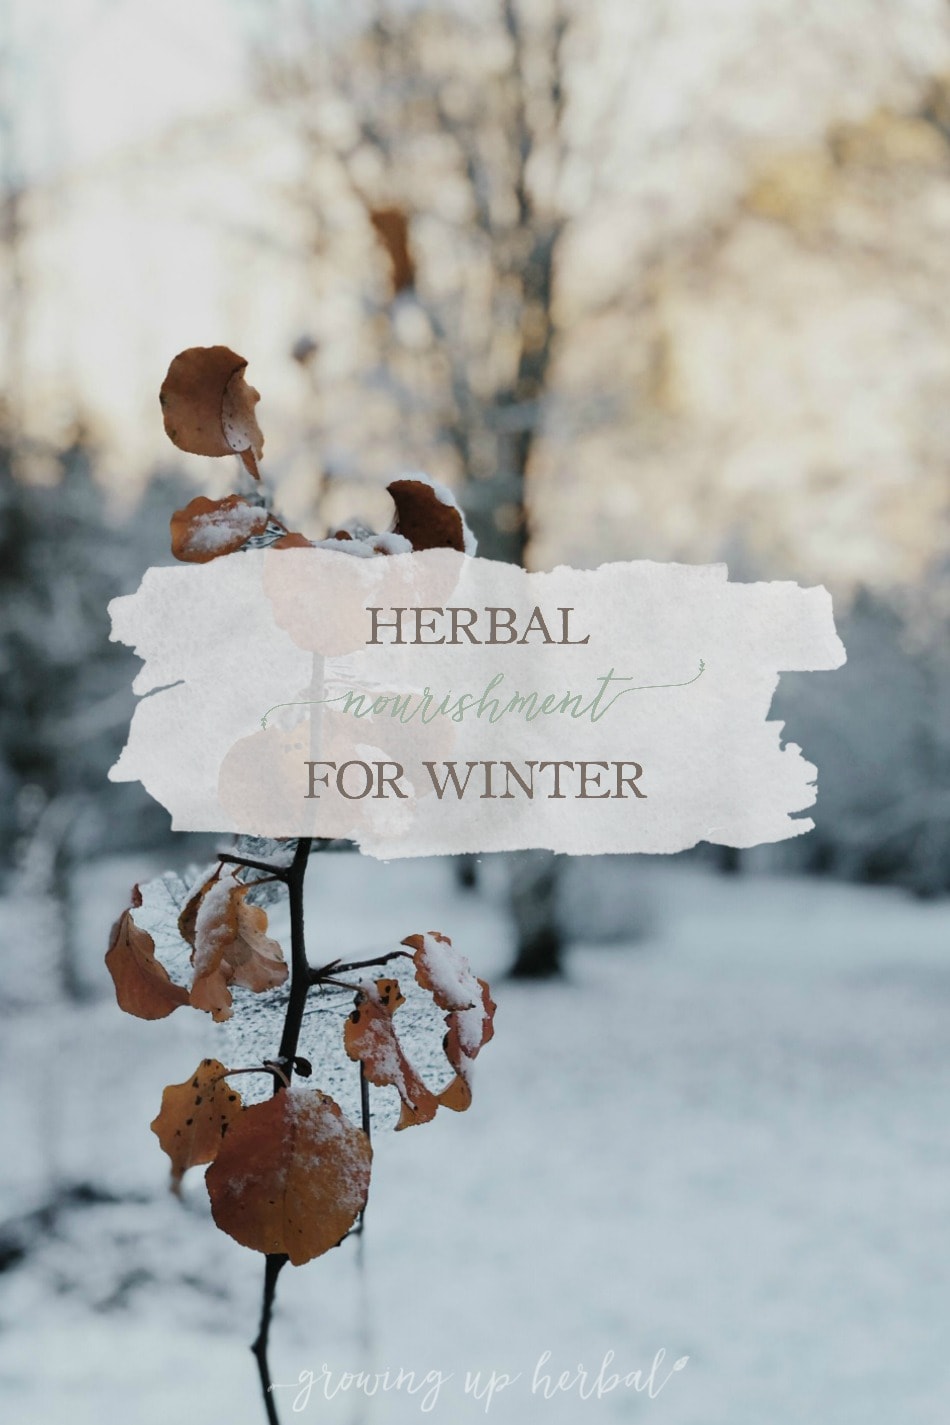 Herbal Nourishment for Winter | Growing Up Herbal | Winter has always been a time to slow down and rest. It’s also the perfect time to incorporate some herbal nourishment into your diet. Learn how here.